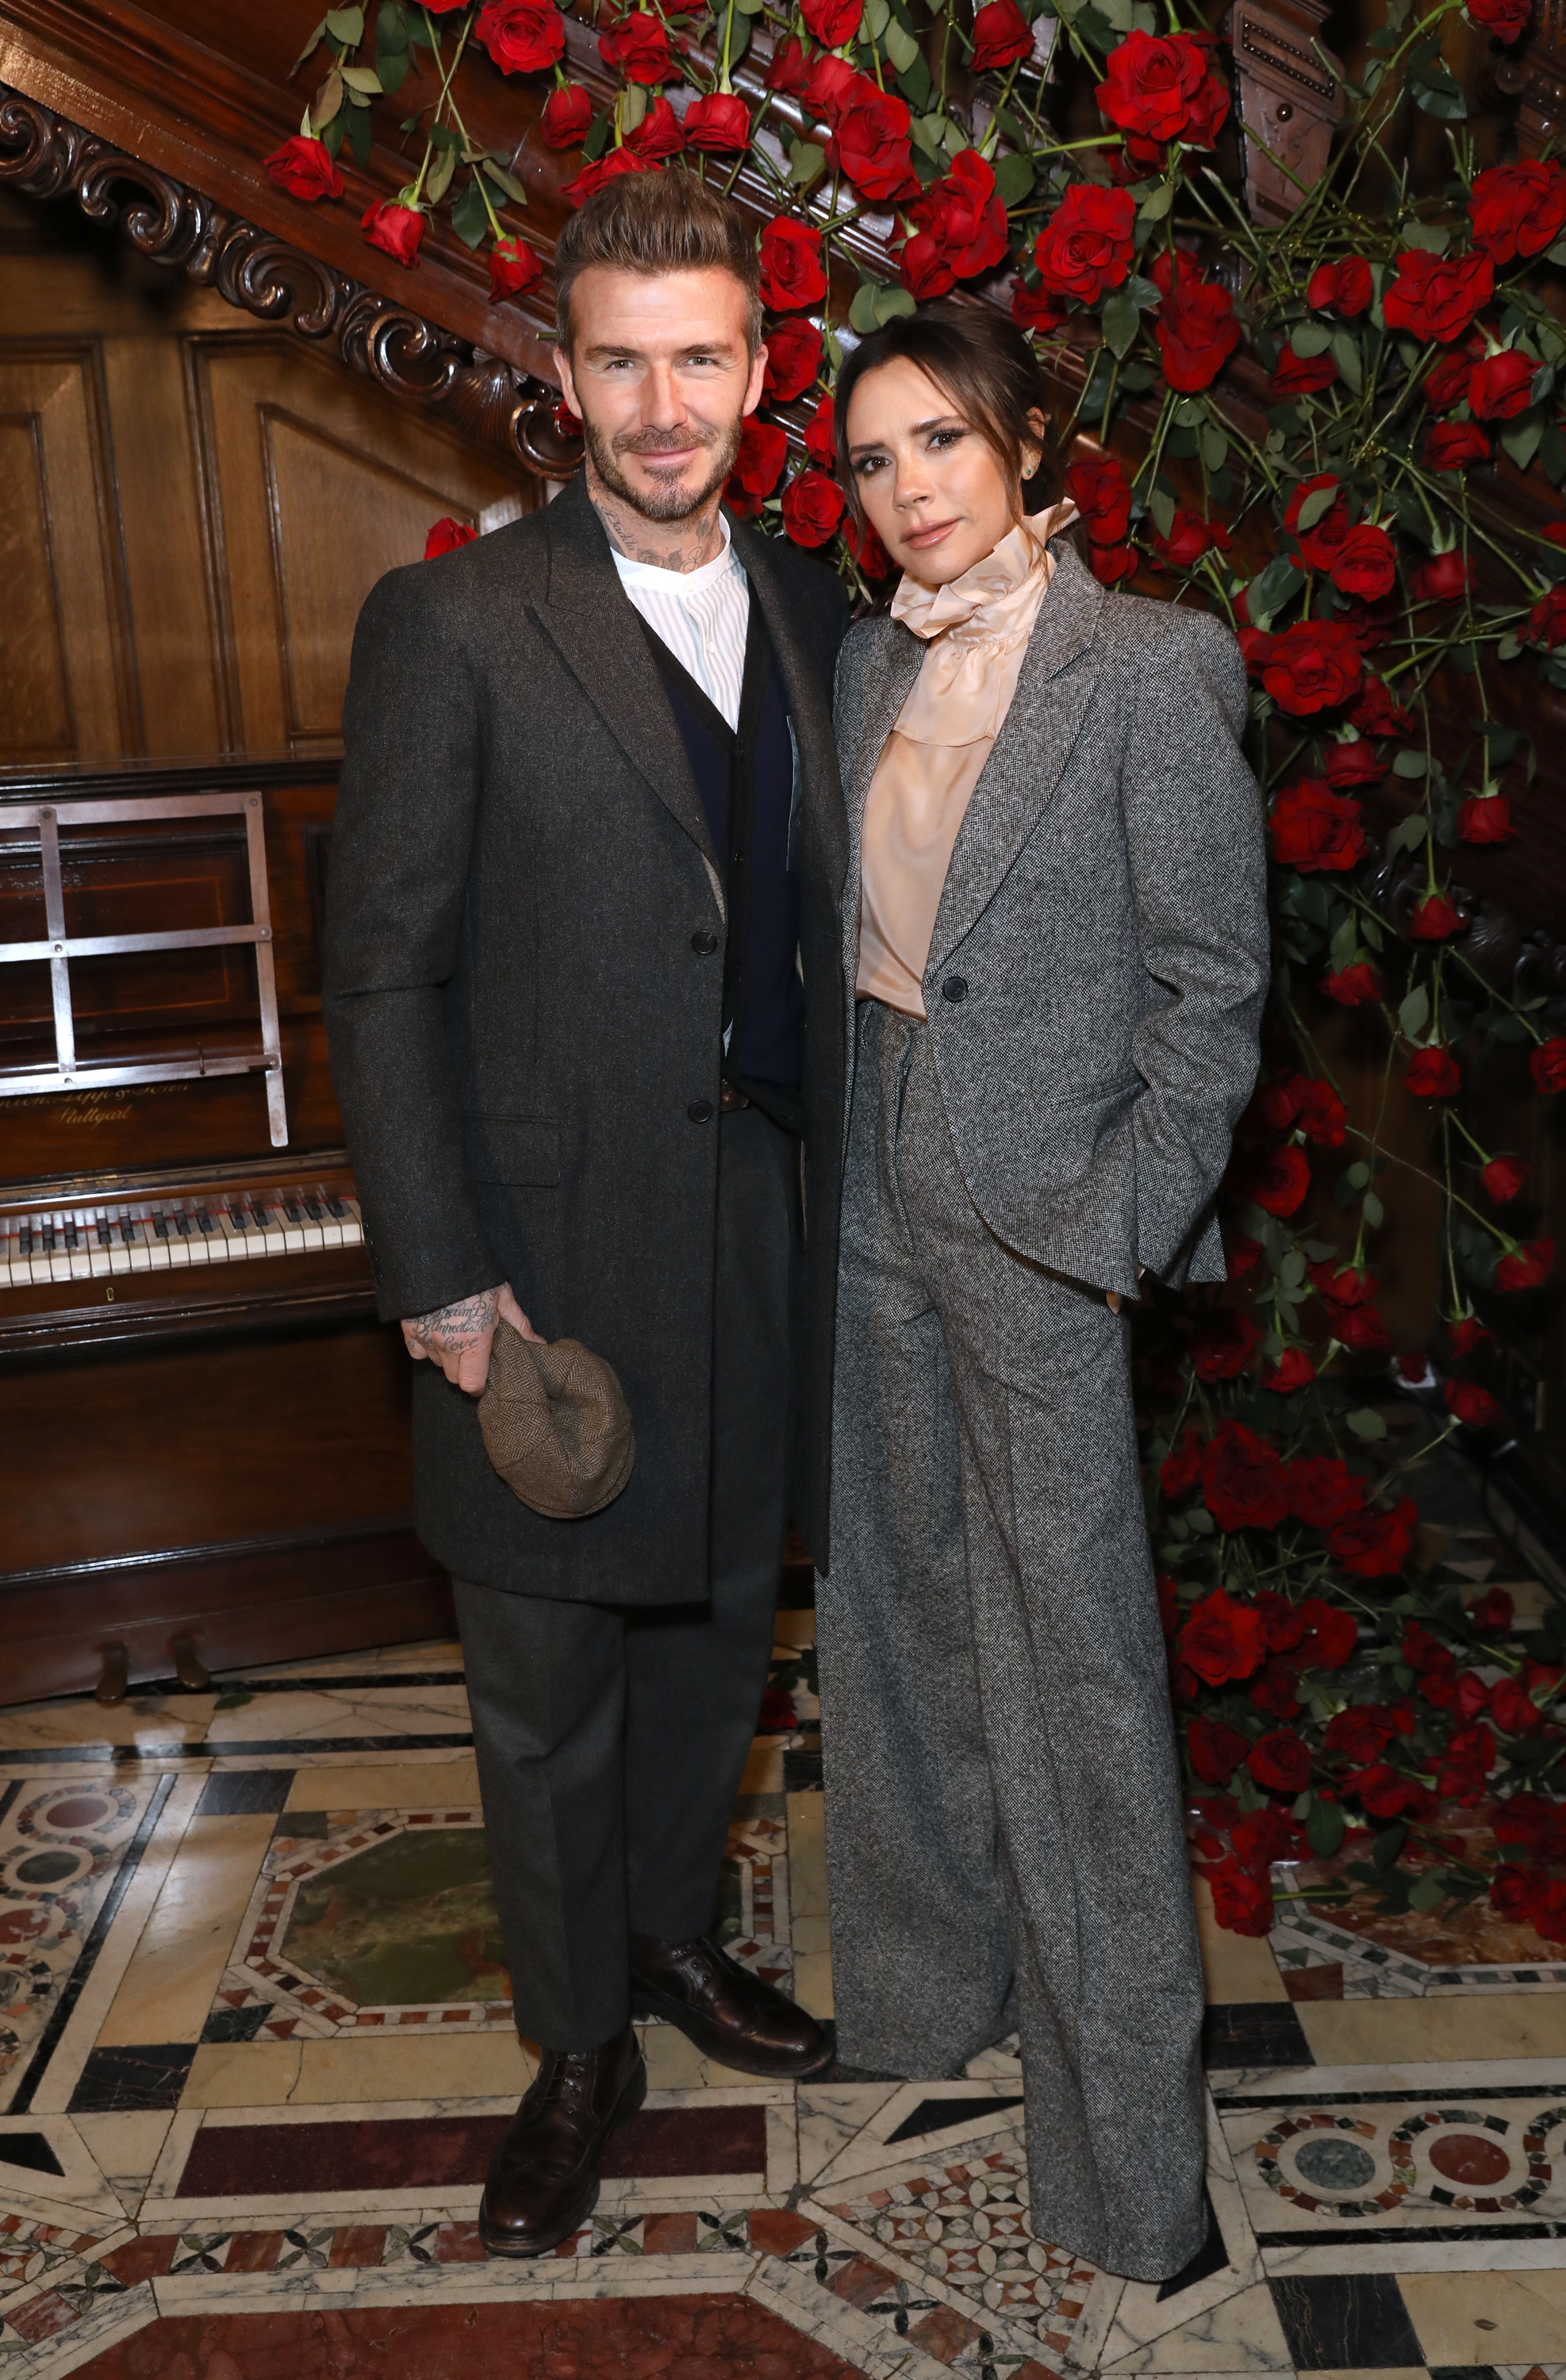 David and Victoria Beckham at the London Fashion Week Men's in London, England on January 6, 2019 | Source: Getty Images